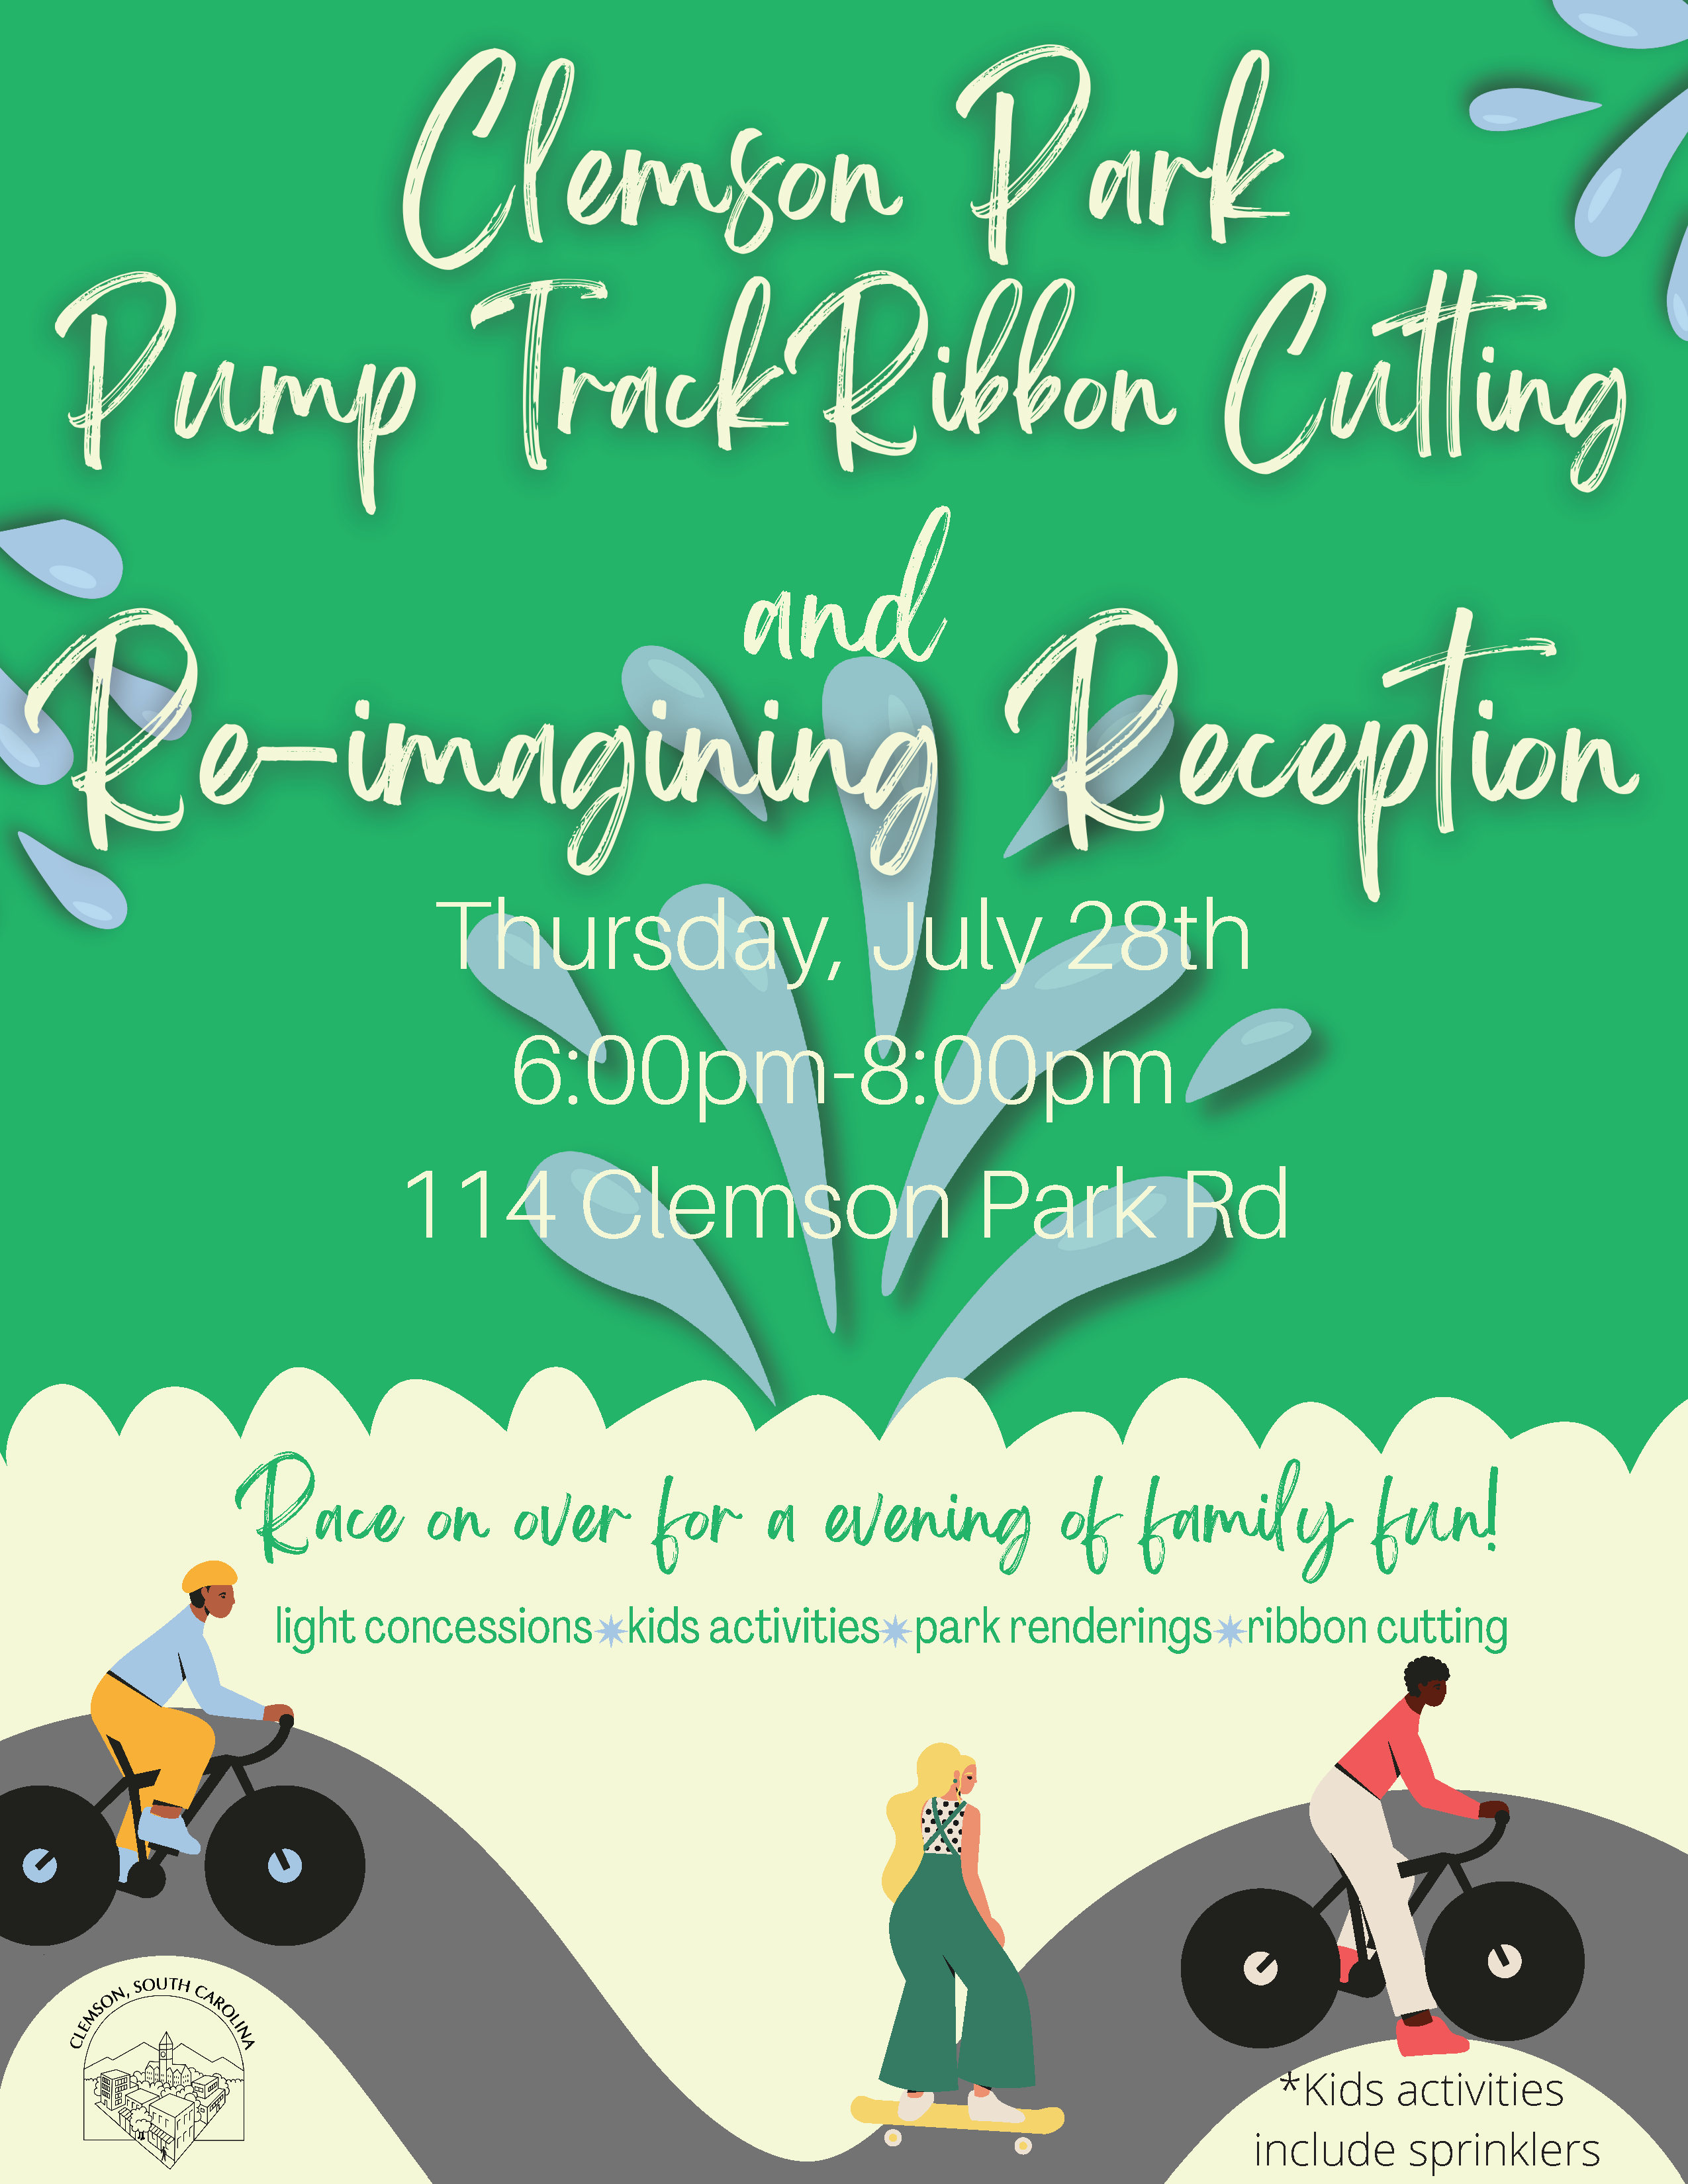 Clemson Park Pump Track Ribbon Cutting and Re-imagining Reception